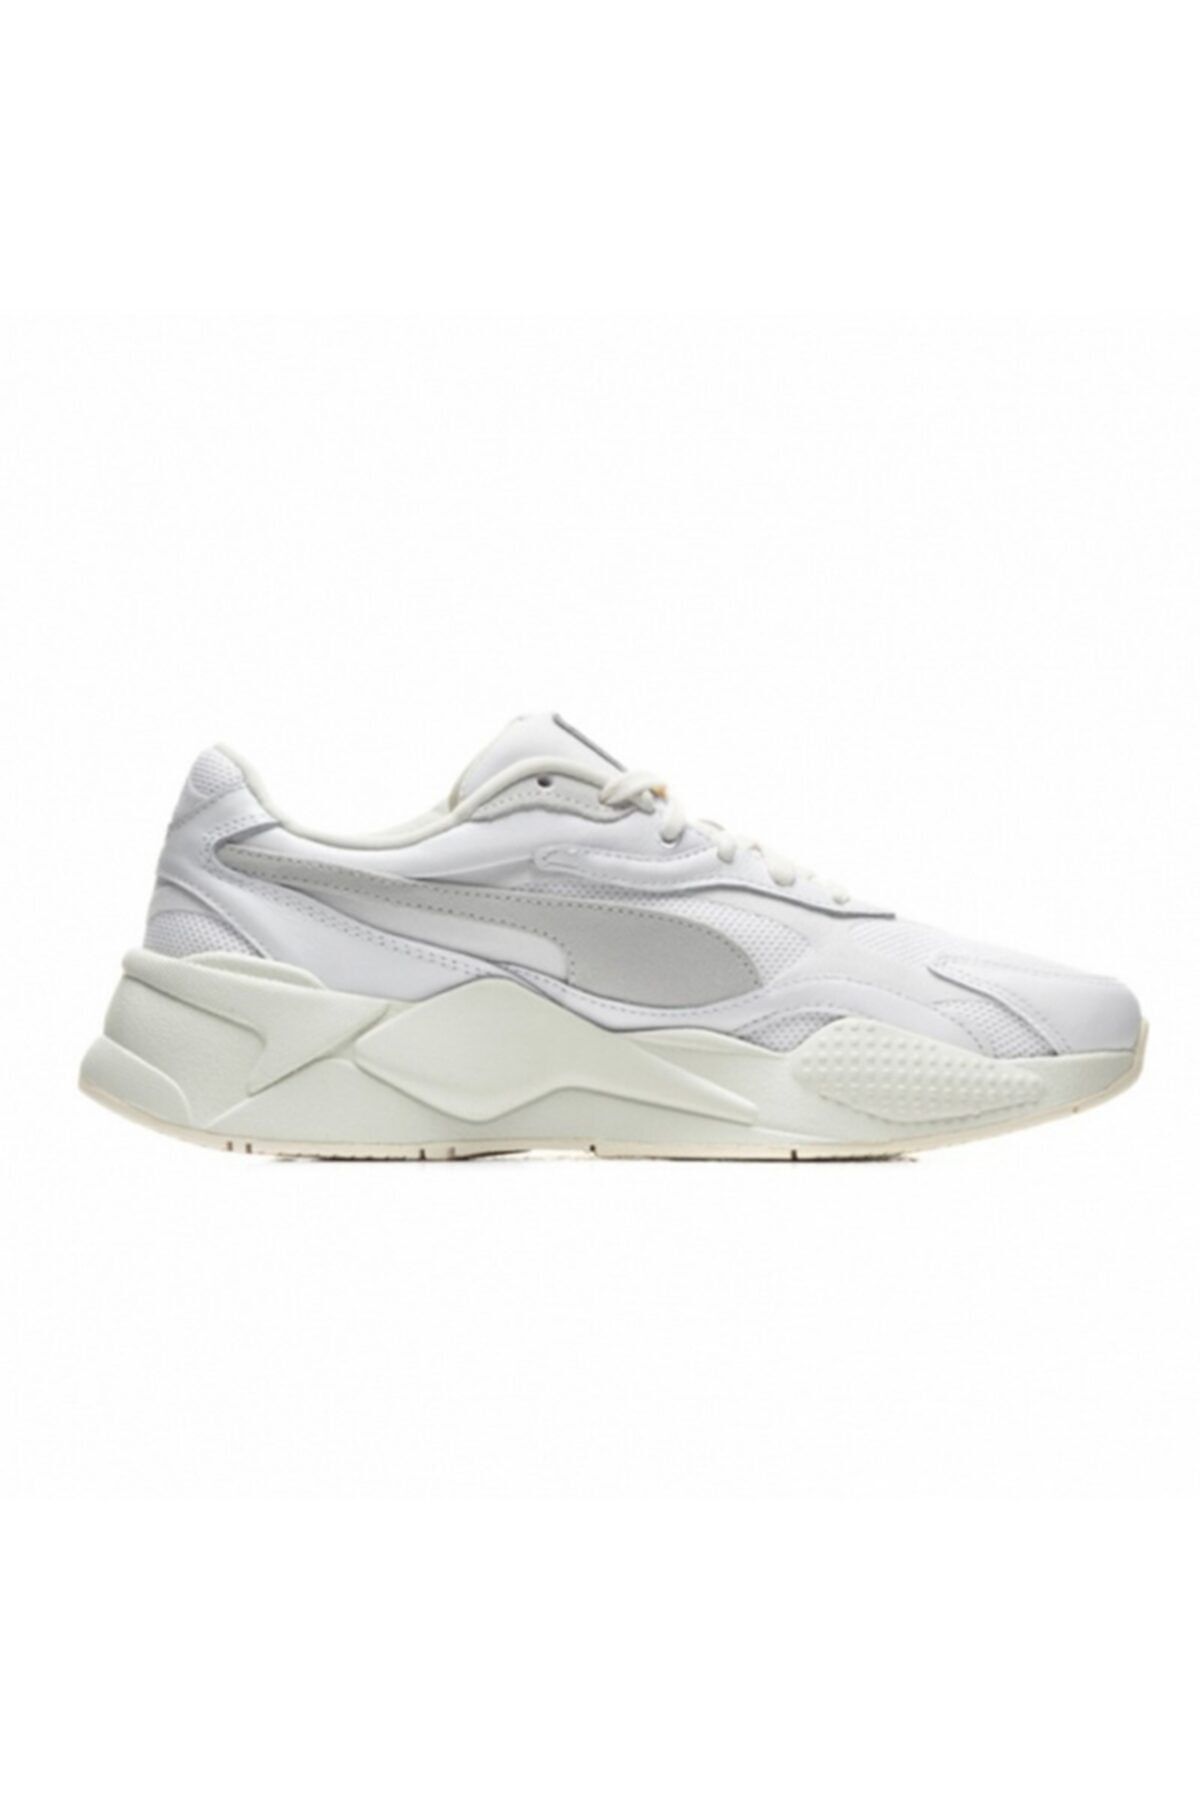 Puma Rs-x³ Luxe